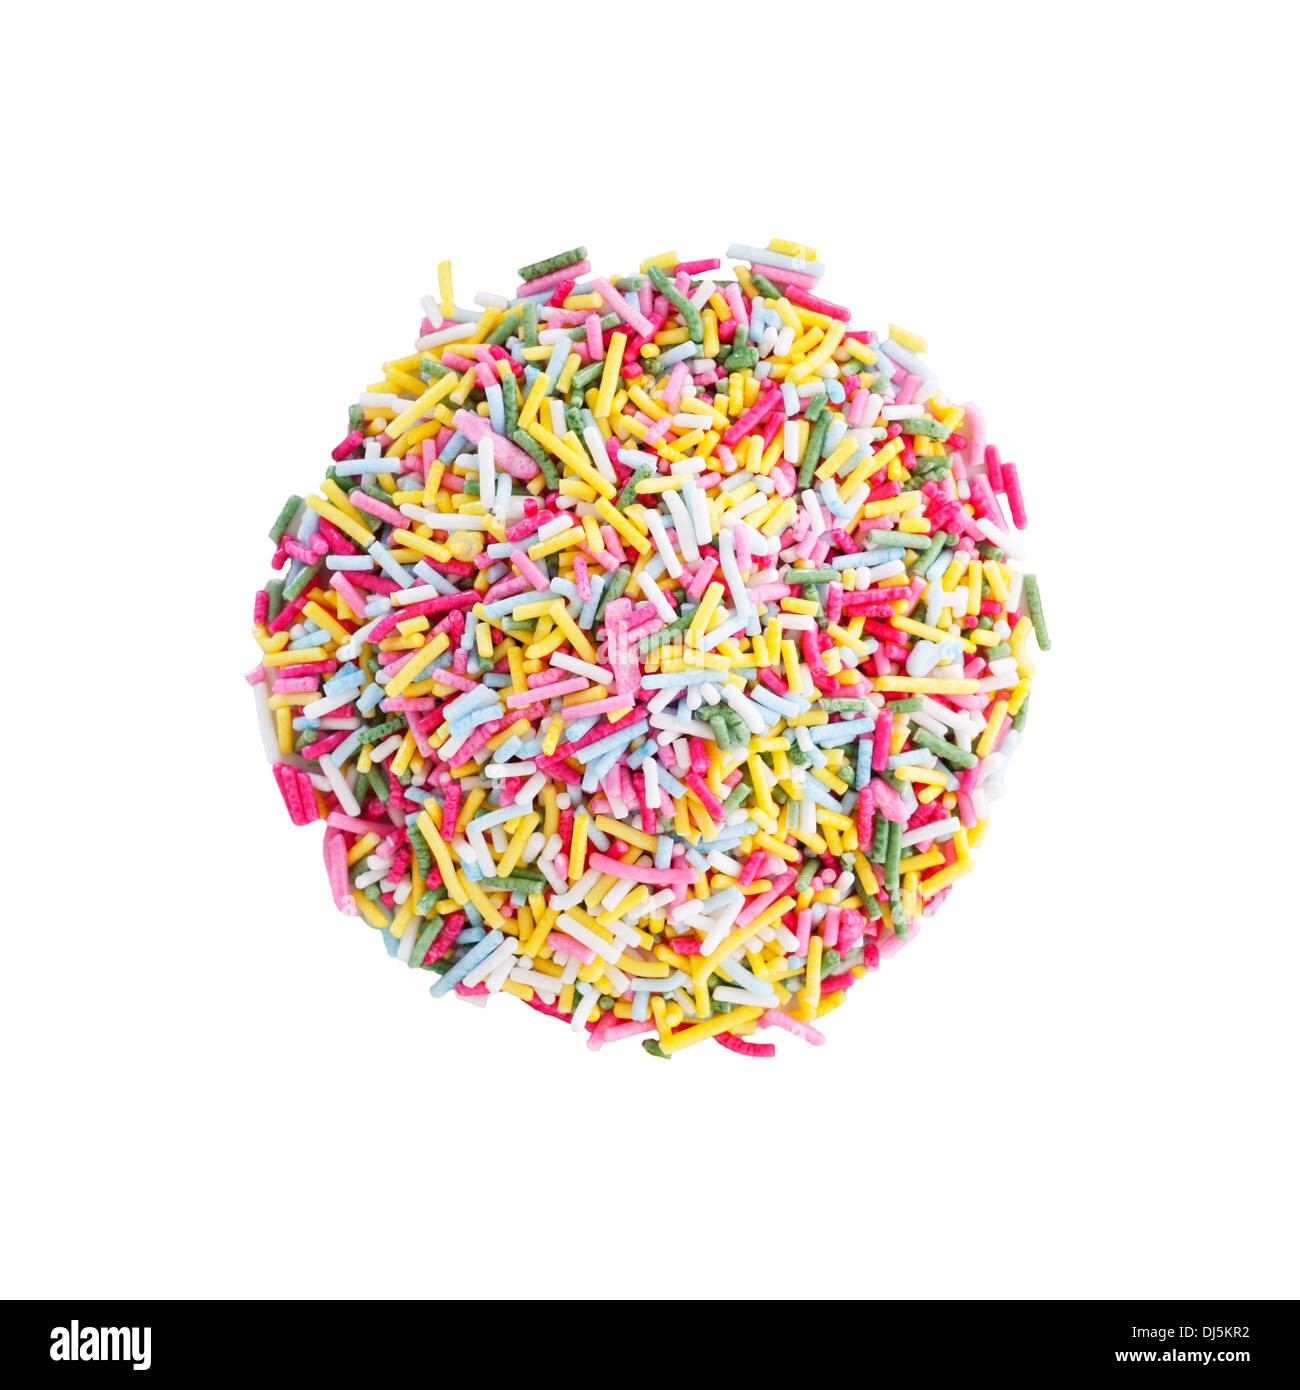 Sugar strands cake decorations on a white background Stock Photo